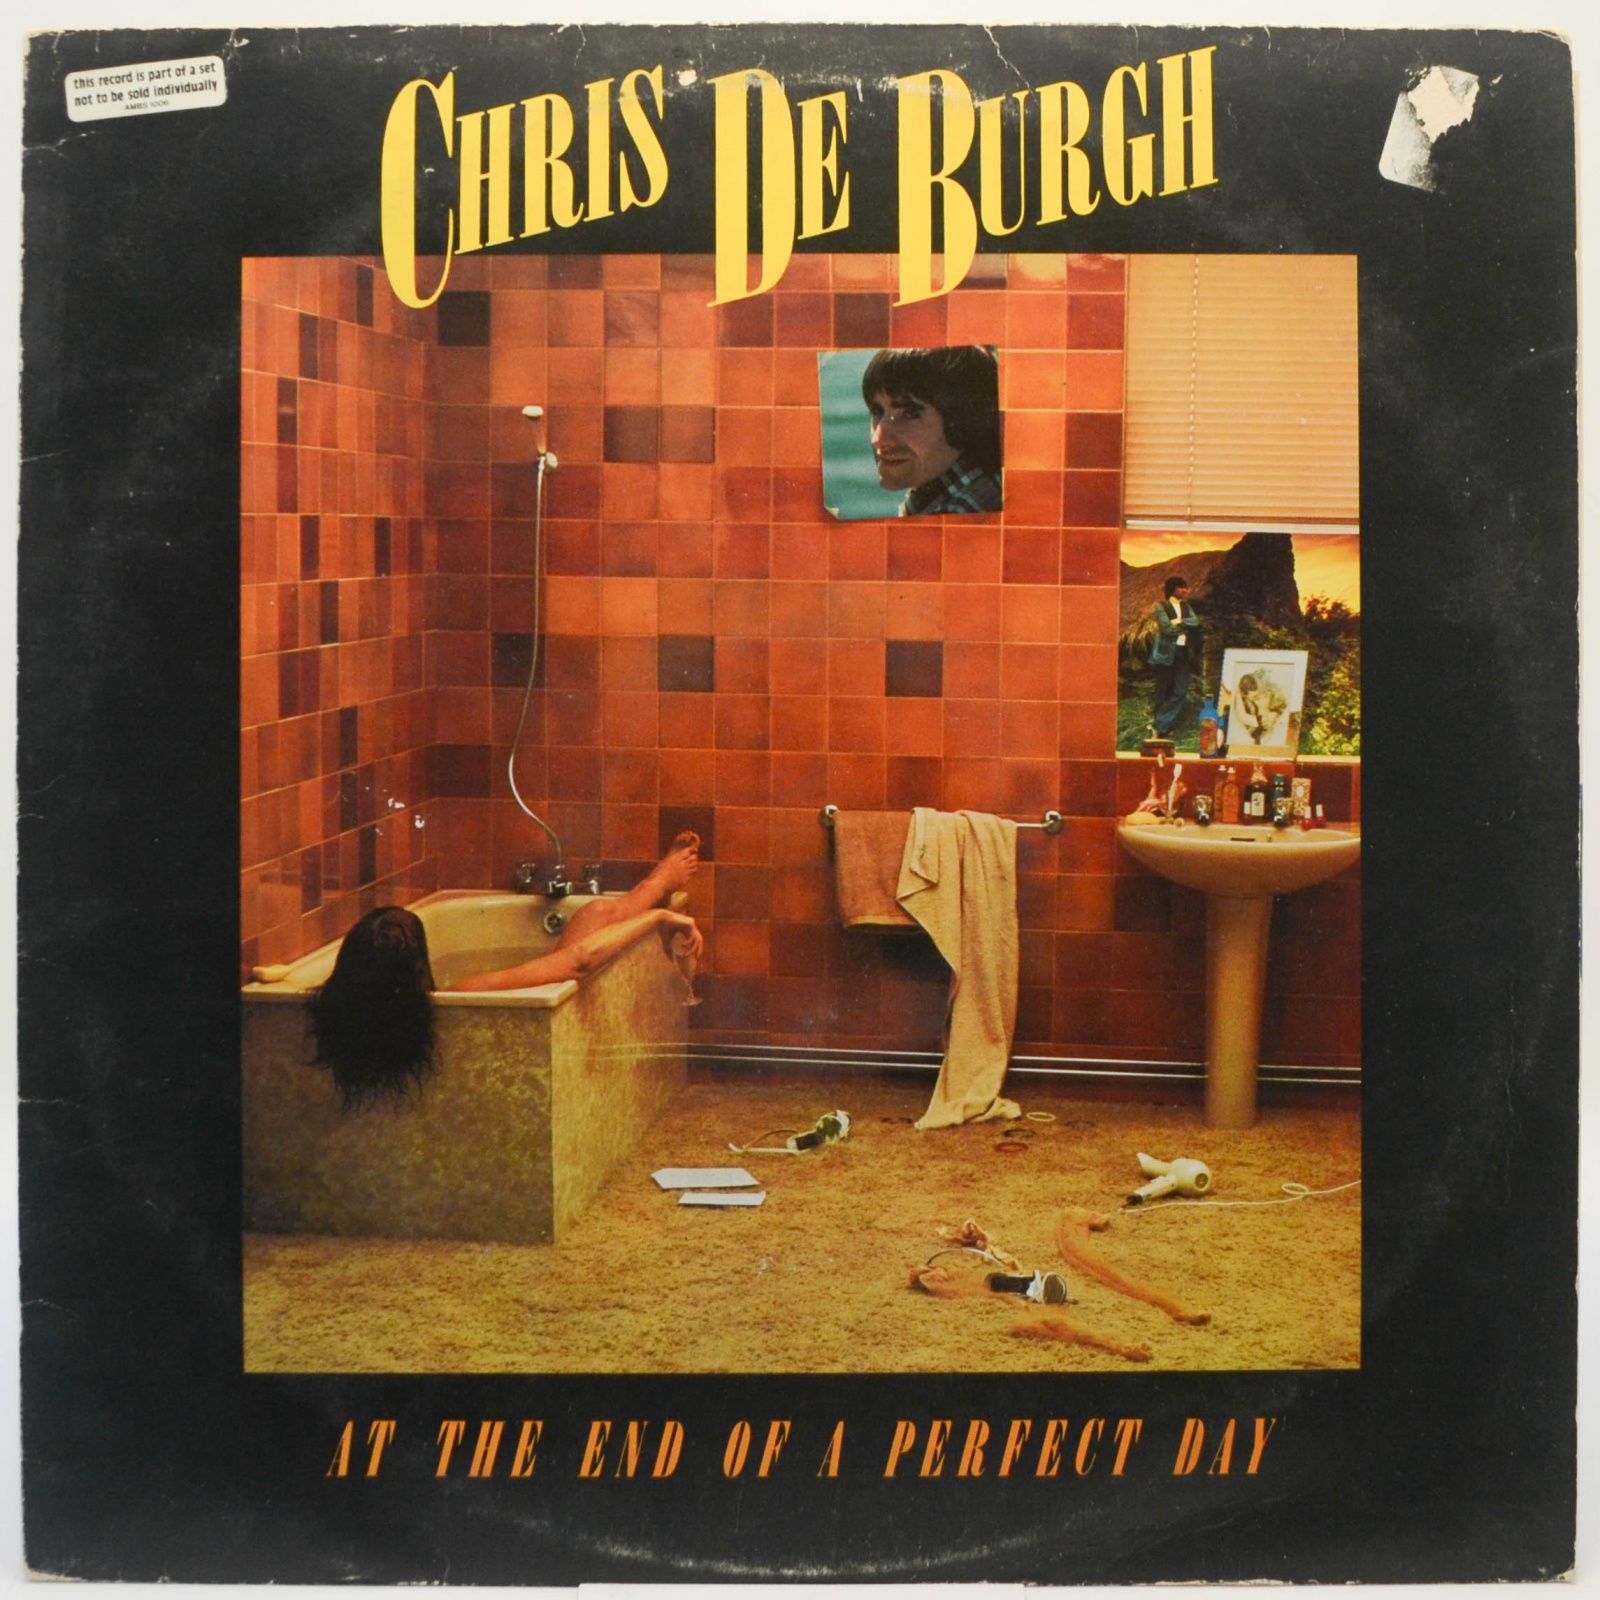 Chris de Burgh — At The End Of A Perfect Day, 1977